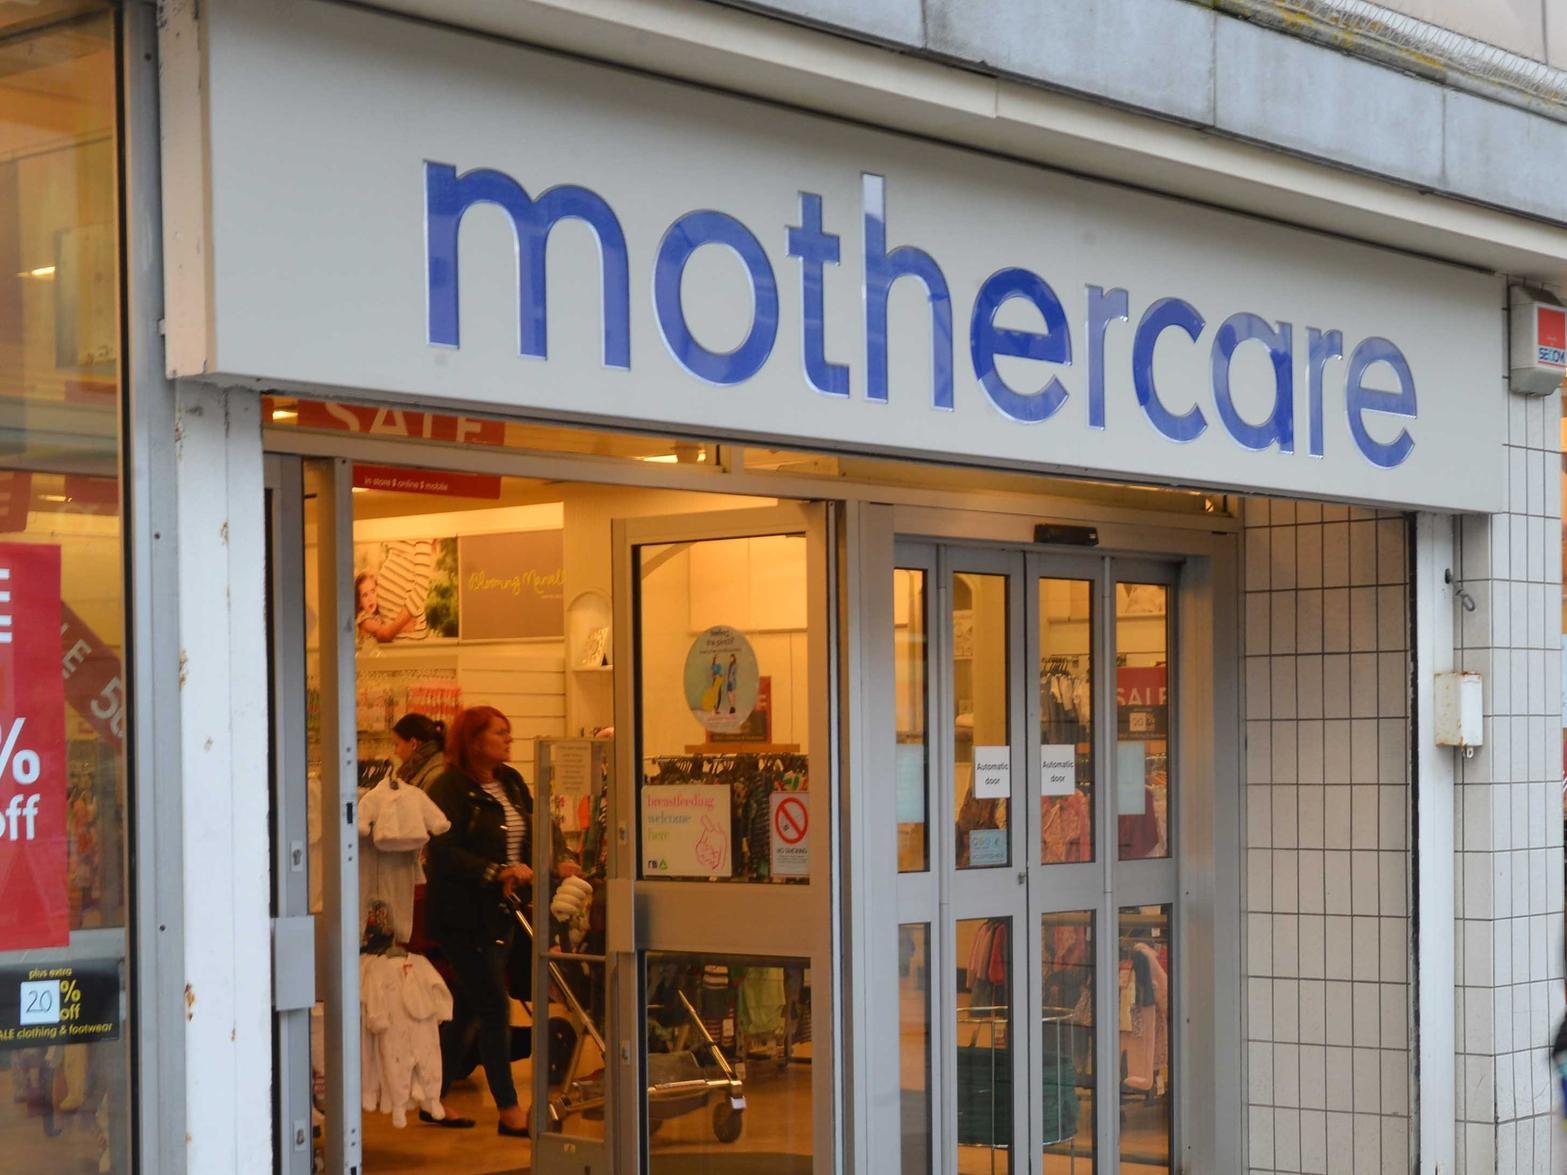 Mothercare has gone into administration.